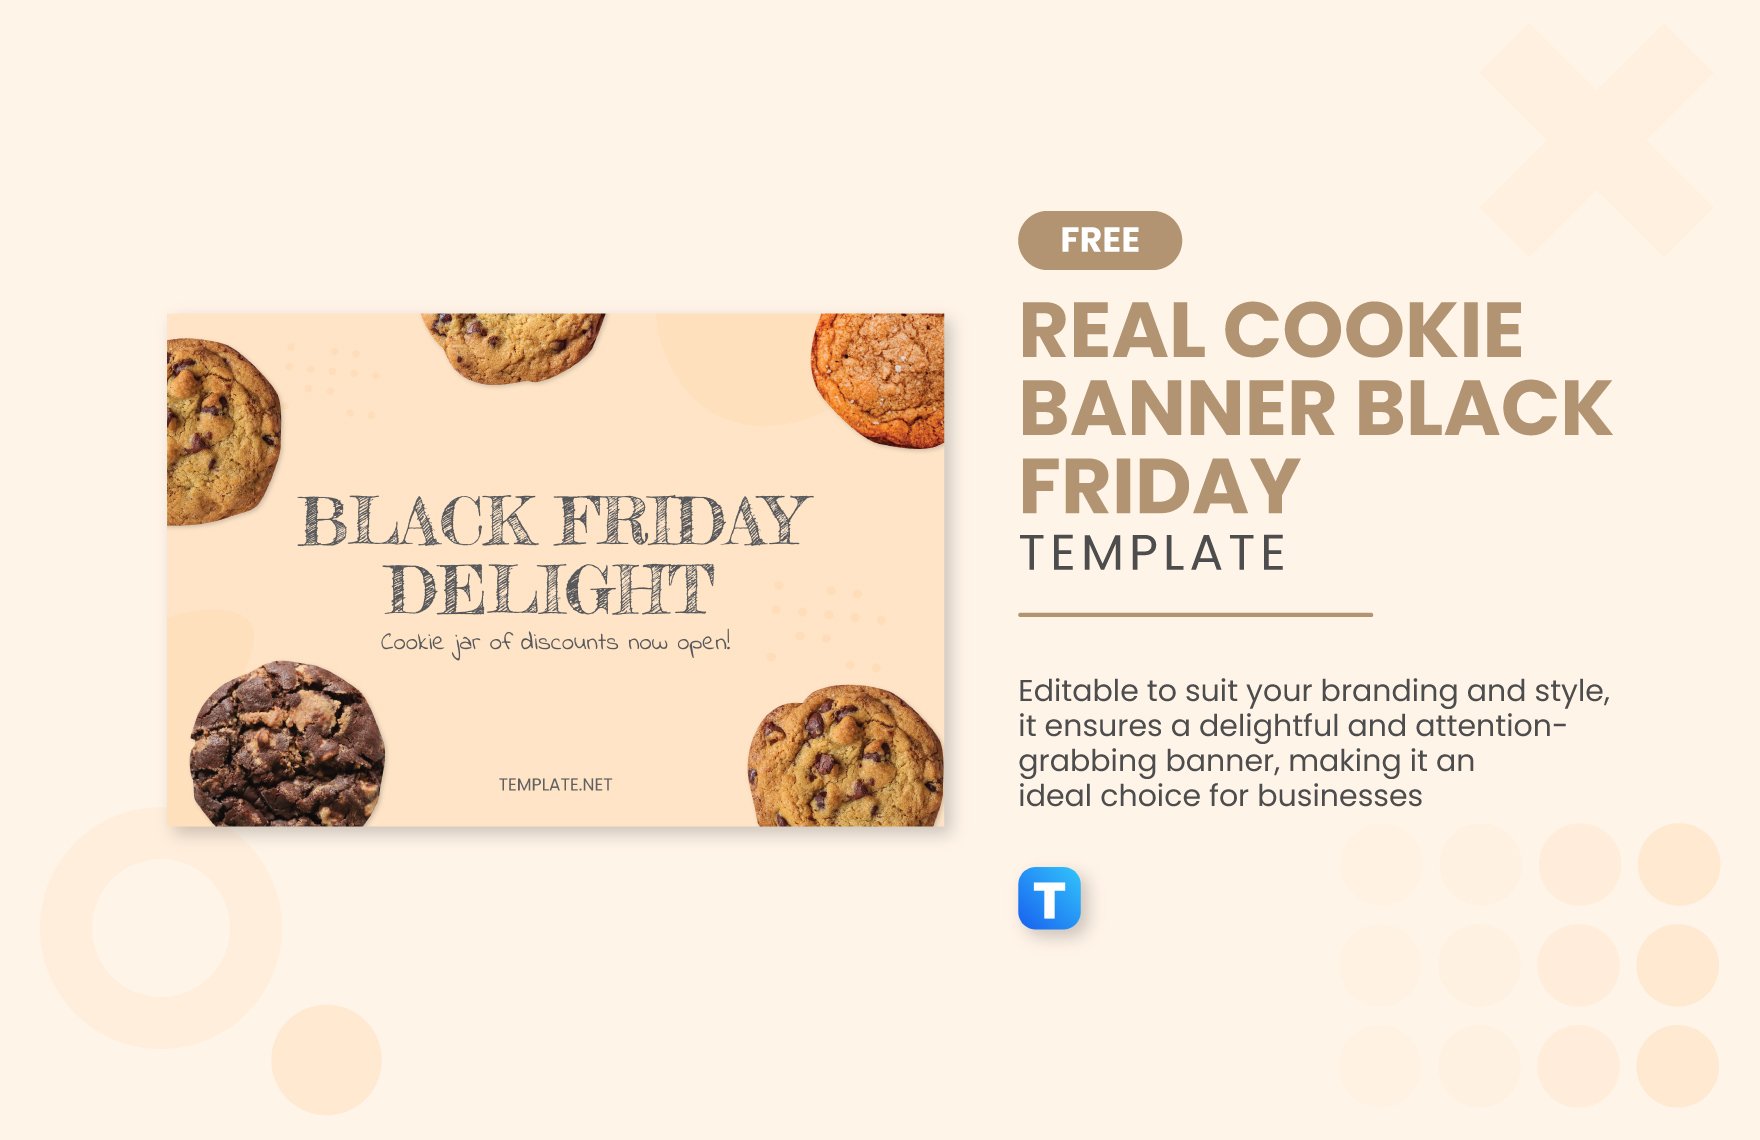 Free Real Cookie Banner Black Friday Template